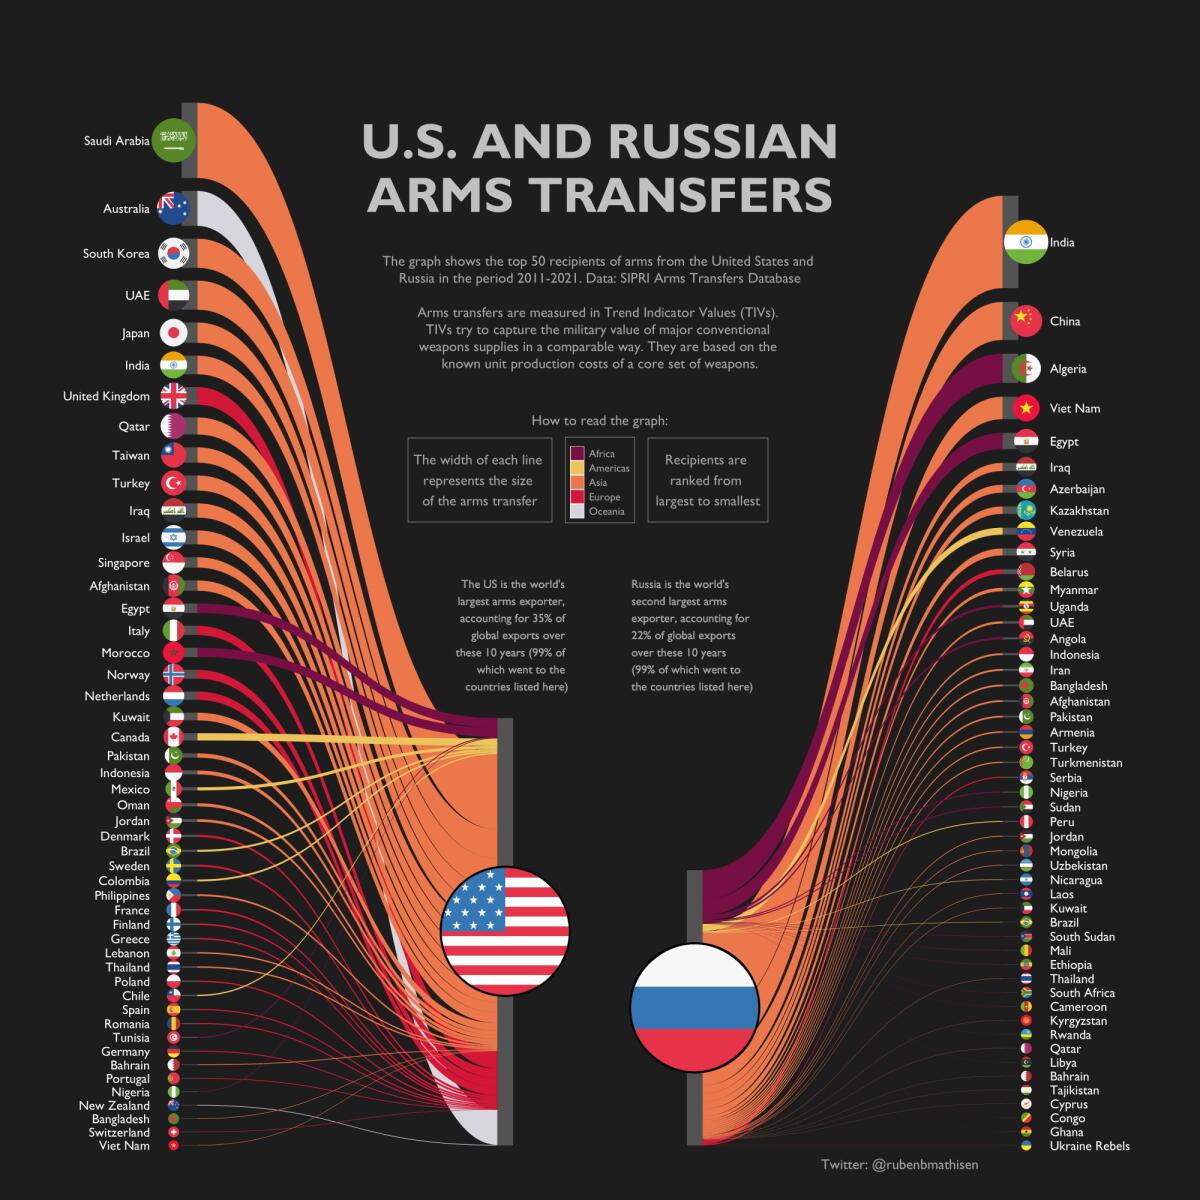 Biggest-U.S-and-Russian-Arms-Trading-Partners-1200px.jpeg